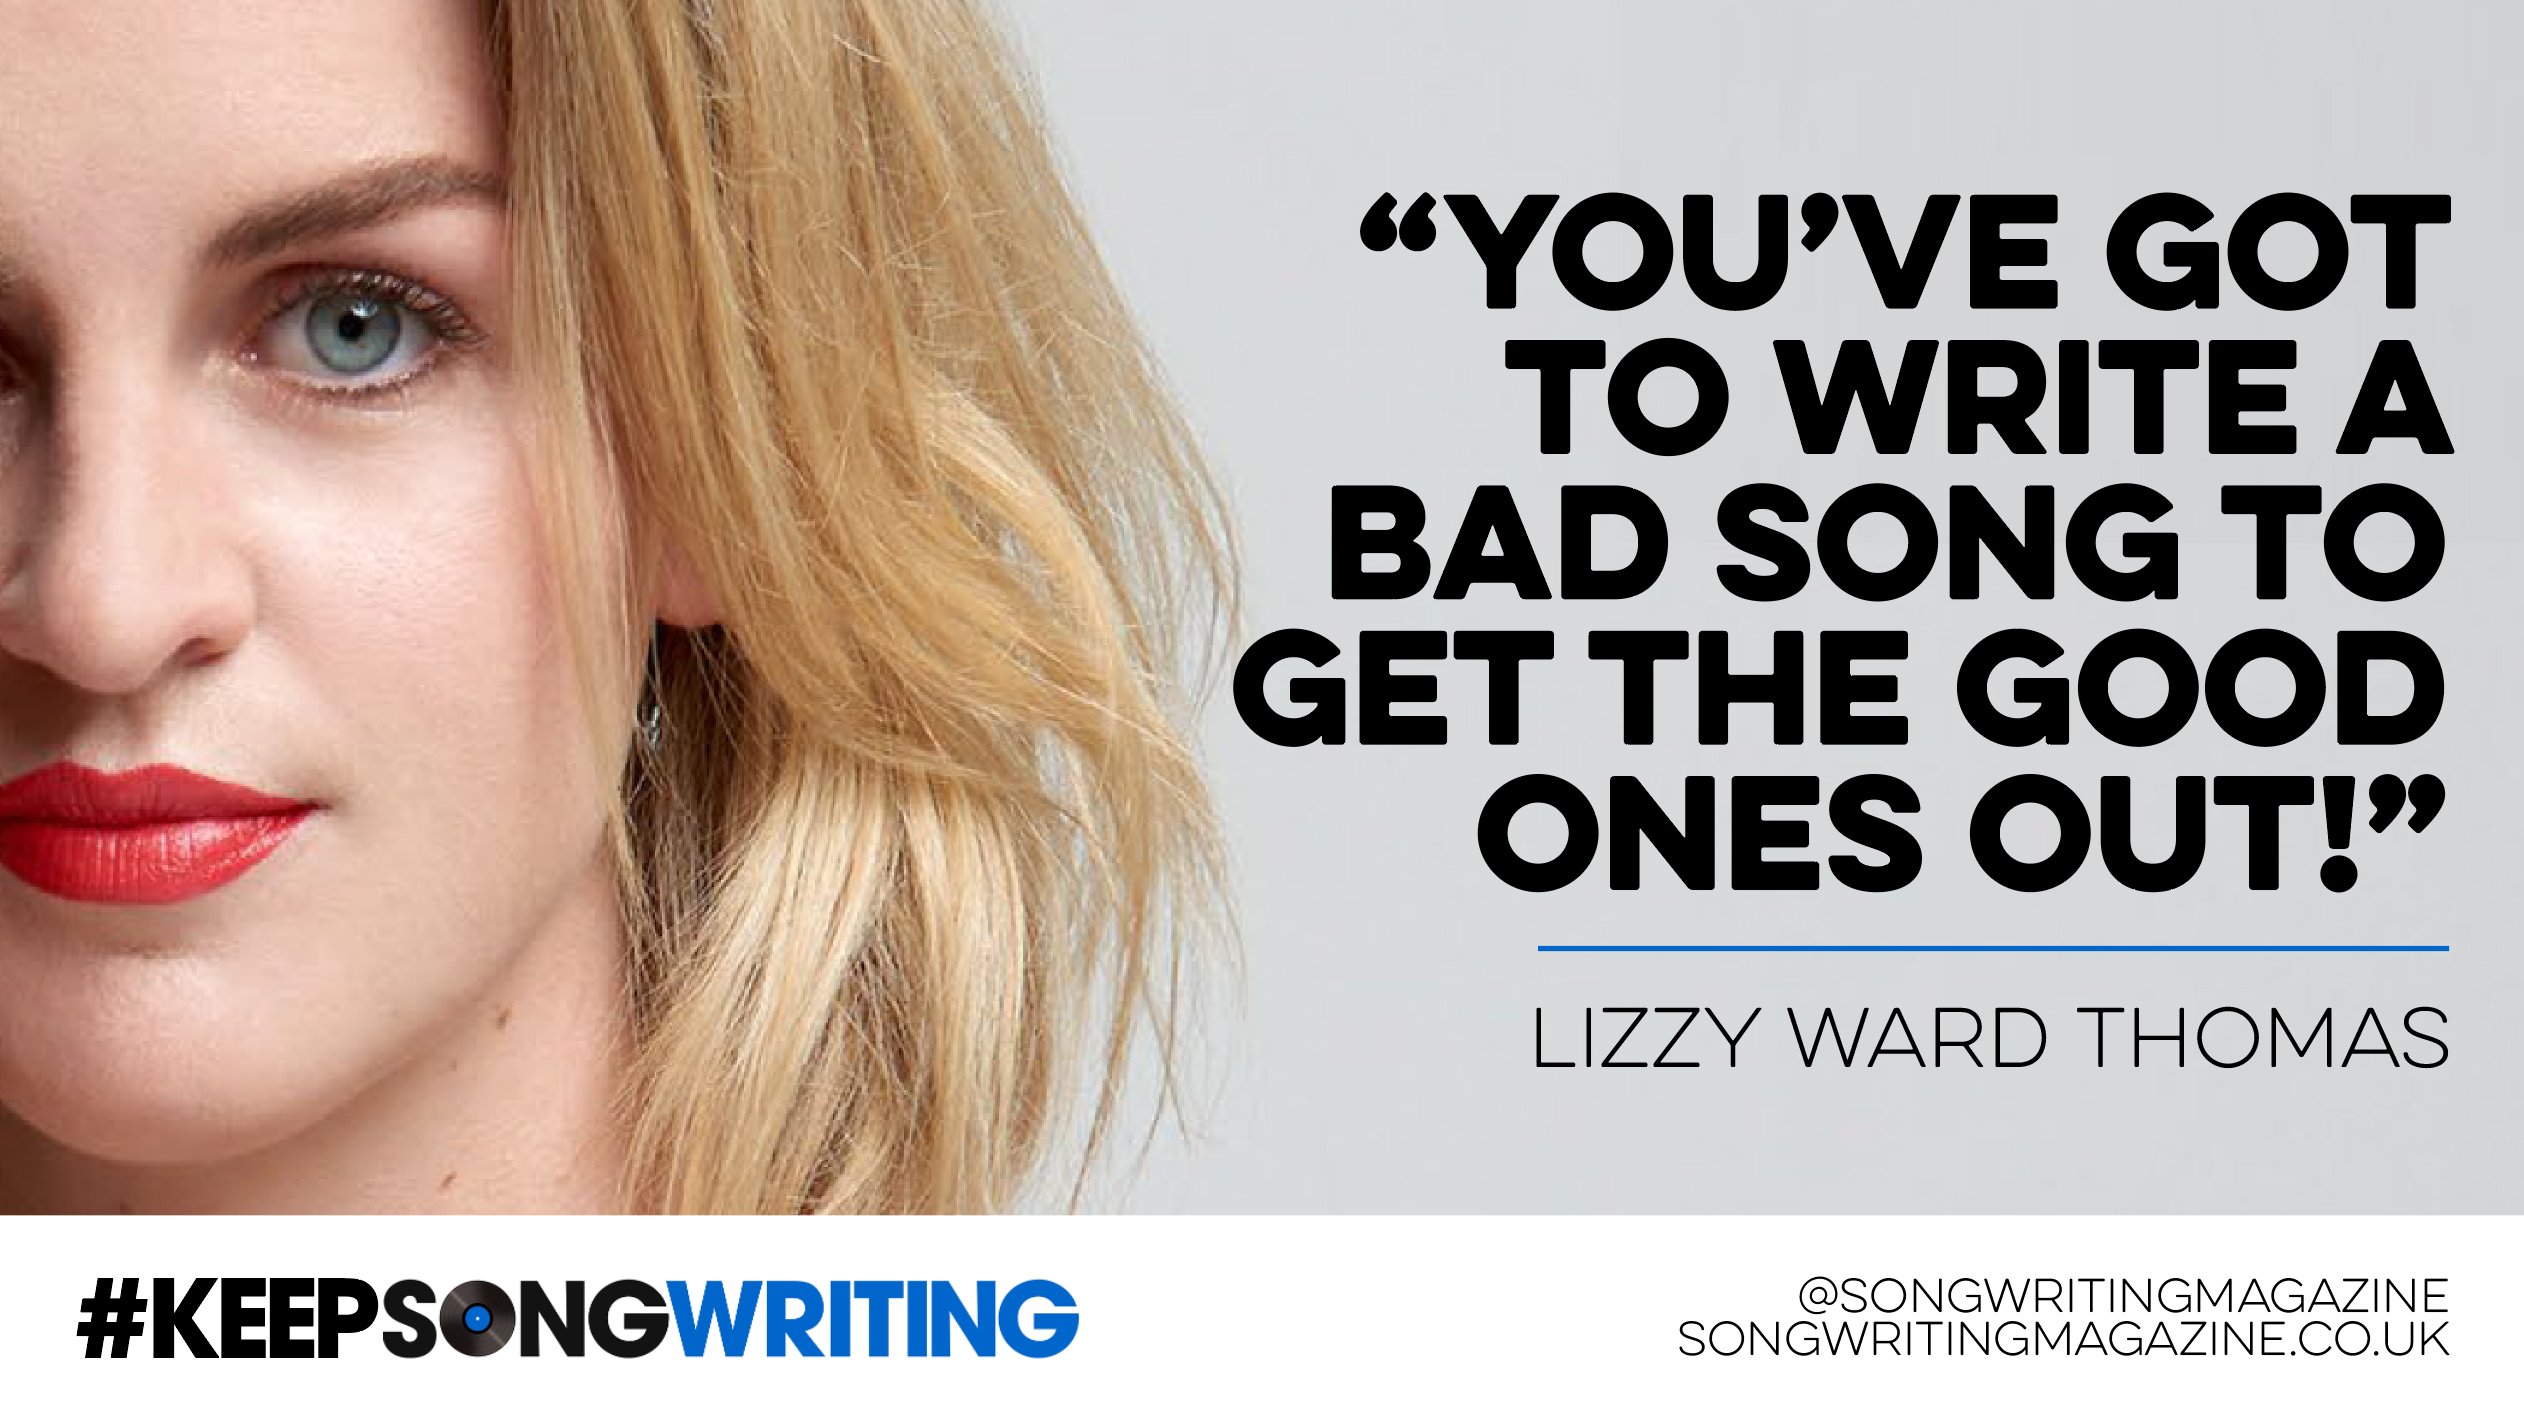 &quot;You've got to write a bad song...-youve-got-write-bad-song-get-good-ones-out-jpg